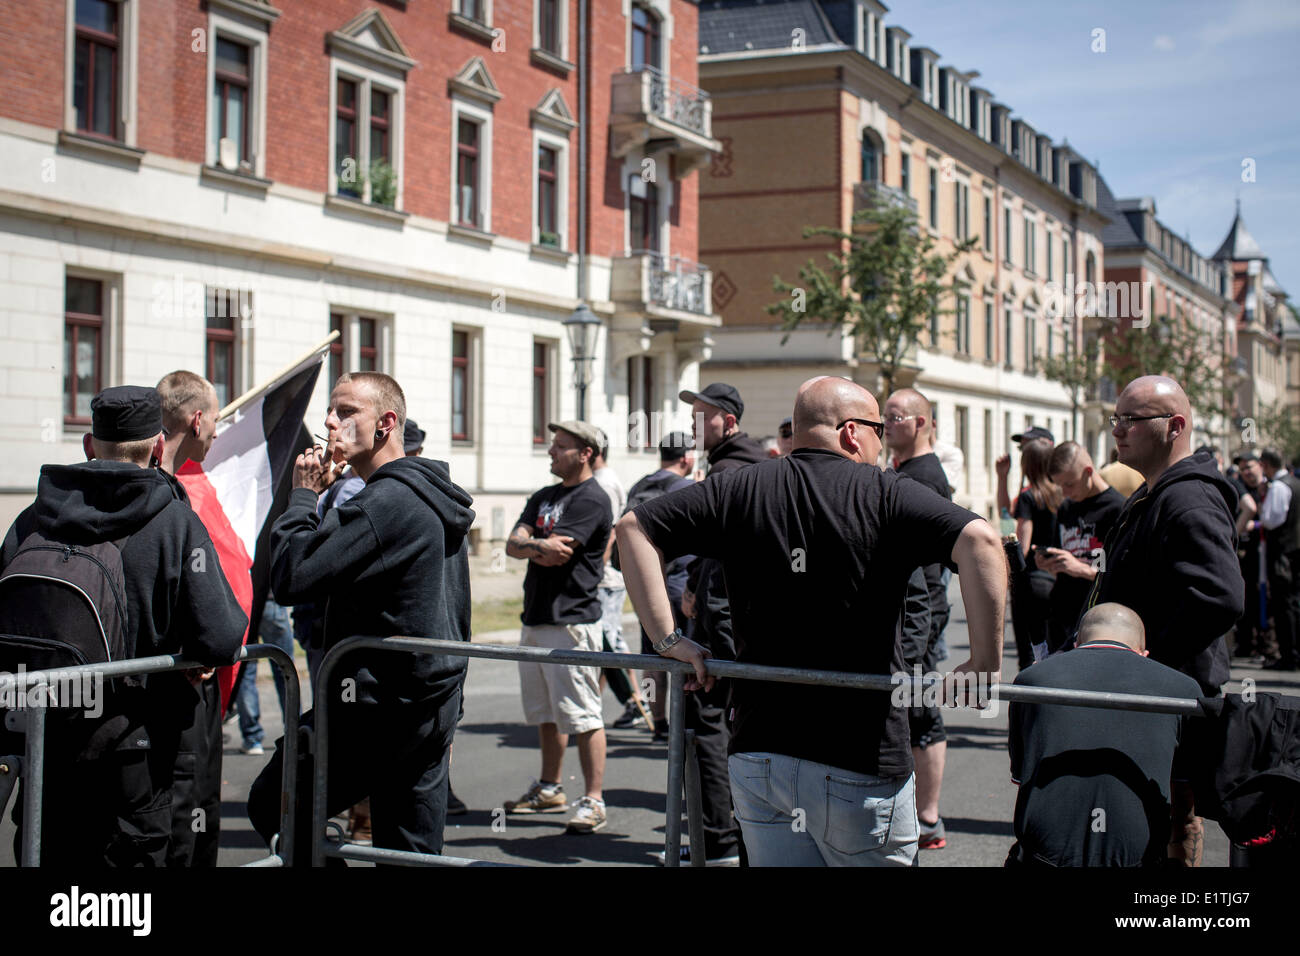 March of nationalists and neo fascists bloked by citizens and Antifa groups in Dresden, Germany, on June 7, 2014. (CTK Photo/Tomas Senkar) Stock Photo